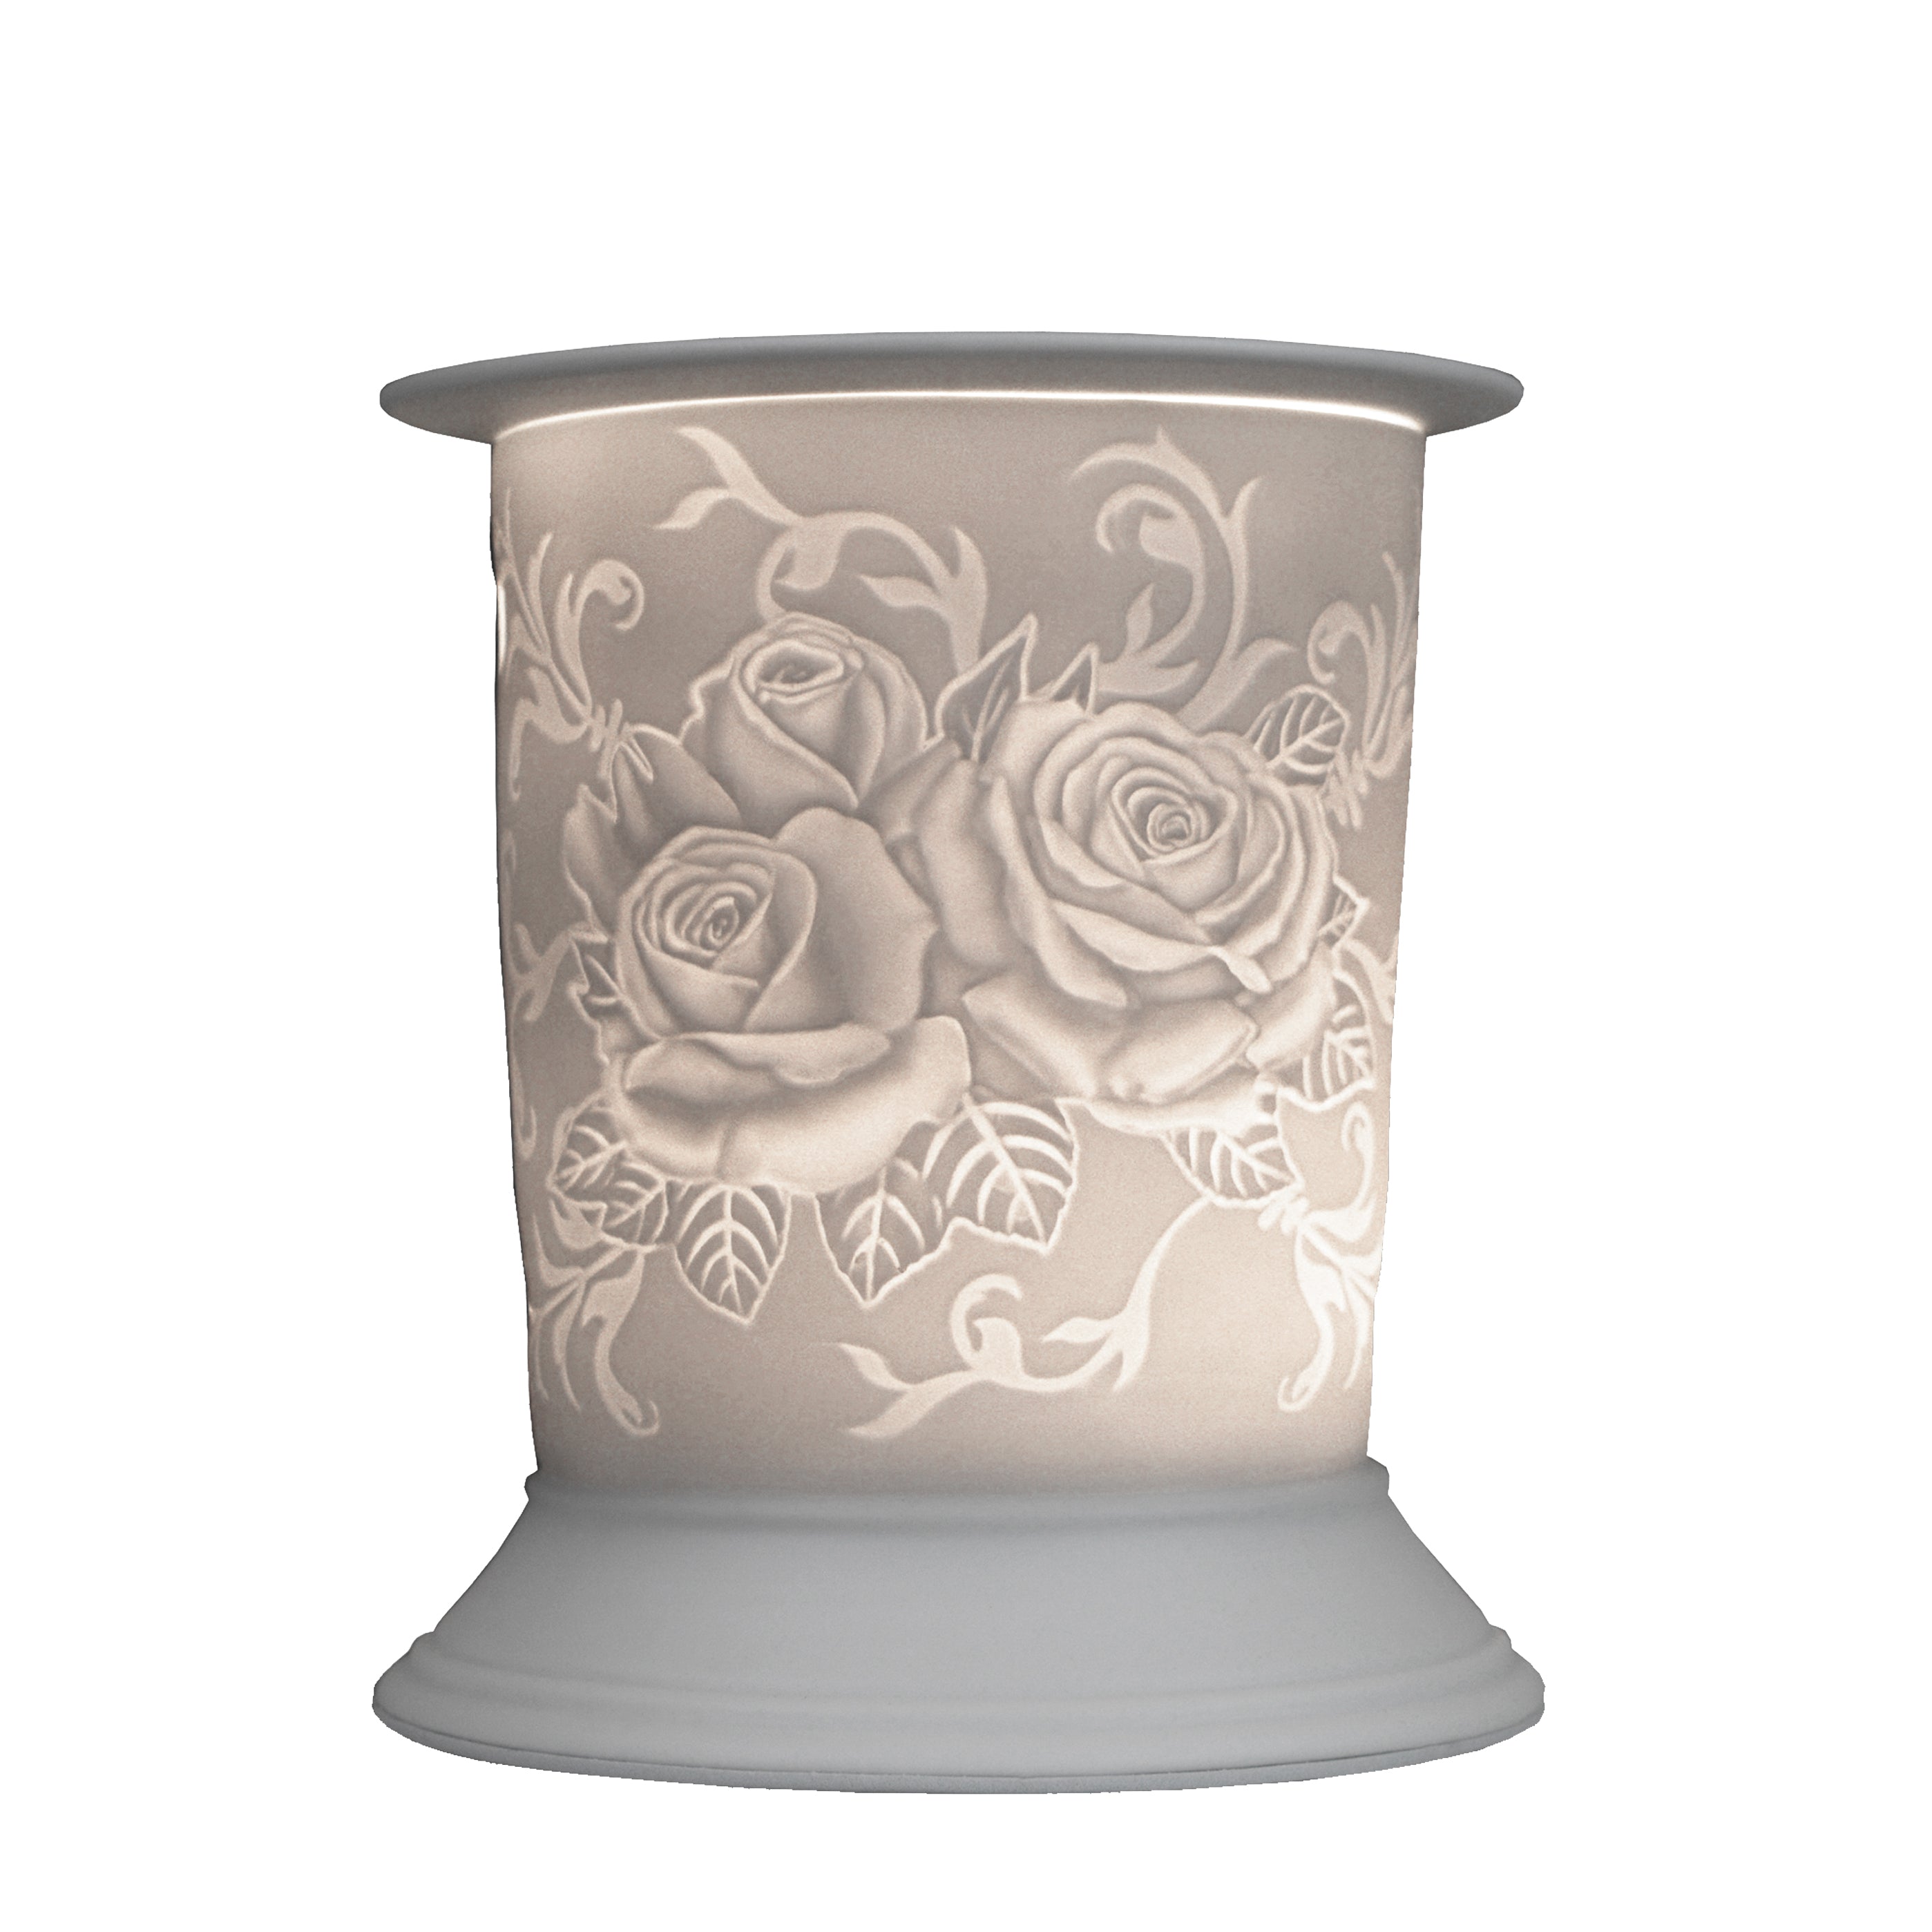 The porcelain material on this Wax Melt Burner allows bright light to shine through it, providing the opportunity to create this summery English Garden design. This is done by crafting images out of thicker and thinner sections of the porcelain, allowing for detailed shadowing and a 3D effect. The porcelains elegant look will fit perfectly in any room is available in a range of designs and two different shapes.